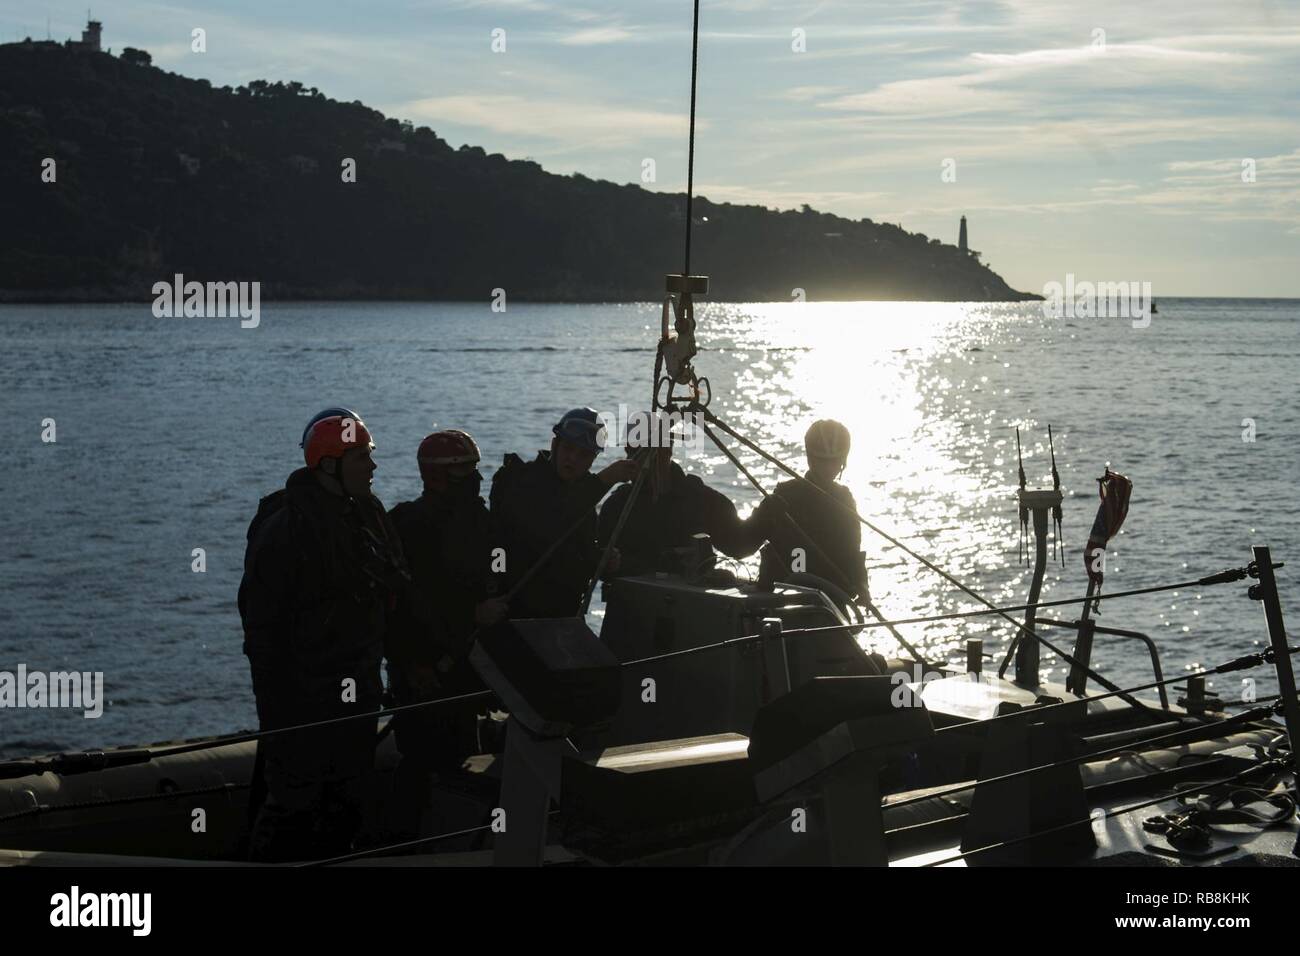 VILLEFRANCHE, France (Dec. 16, 2016) Sailors assigned to the guided-missile destroyer USS Nitze man a rigid hull inflatable boat before mooring to a buey. Nitze, deployed as part of the Eisenhower Carrier Strike Group, is conducting naval operations in the U.S. 6th Fleet area of operations in support of U.S. national security interests in Europe. Stock Photo